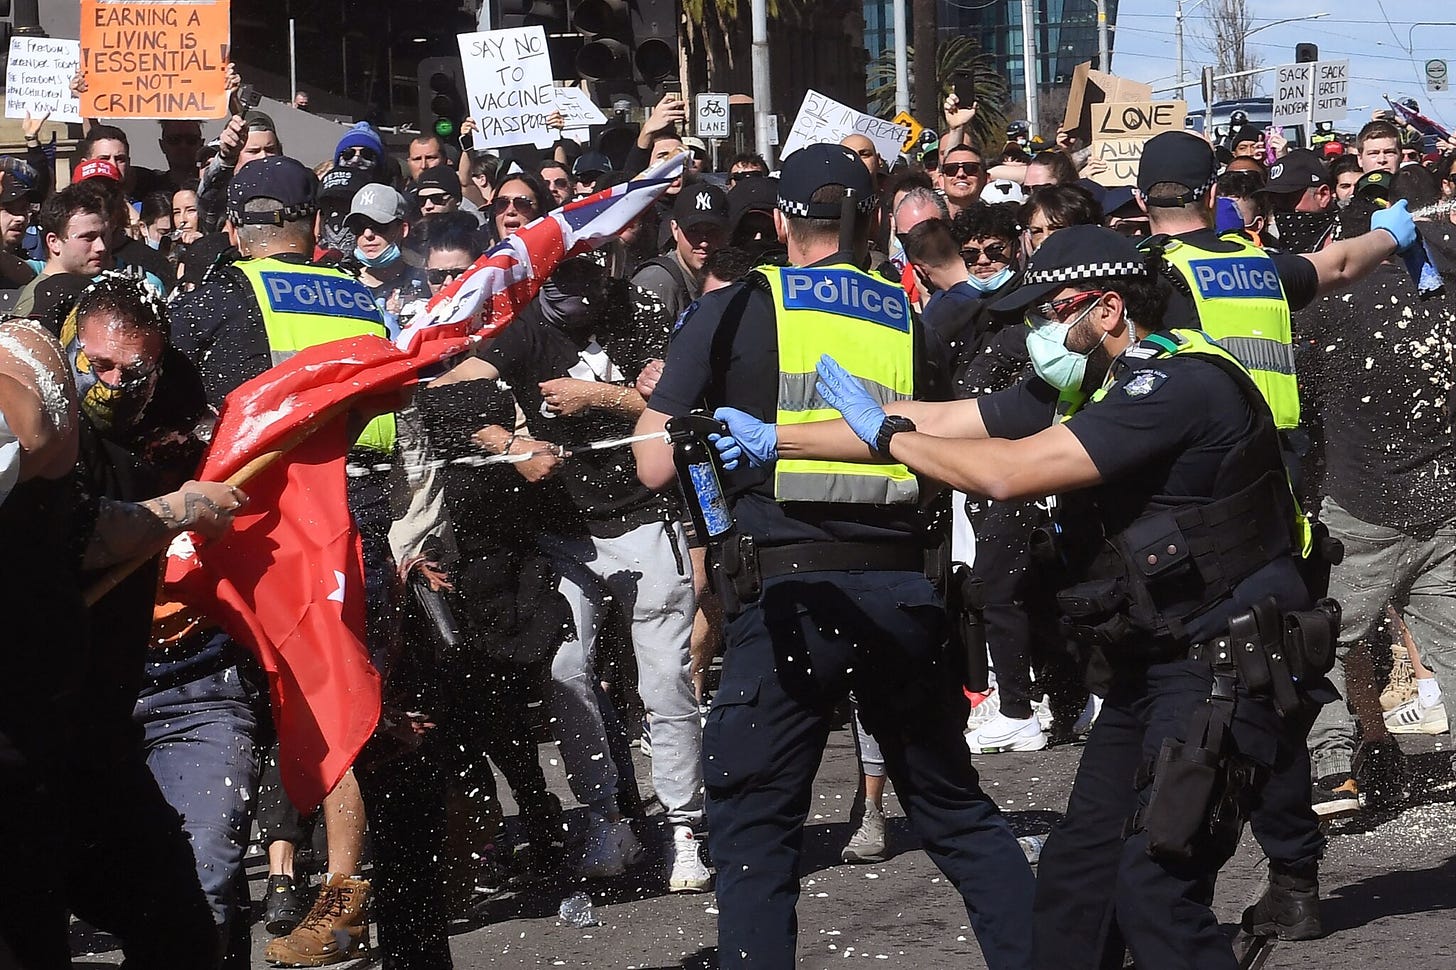 Protests Against Covid Restrictions Turn Violent in Melbourne, Australia -  The New York Times